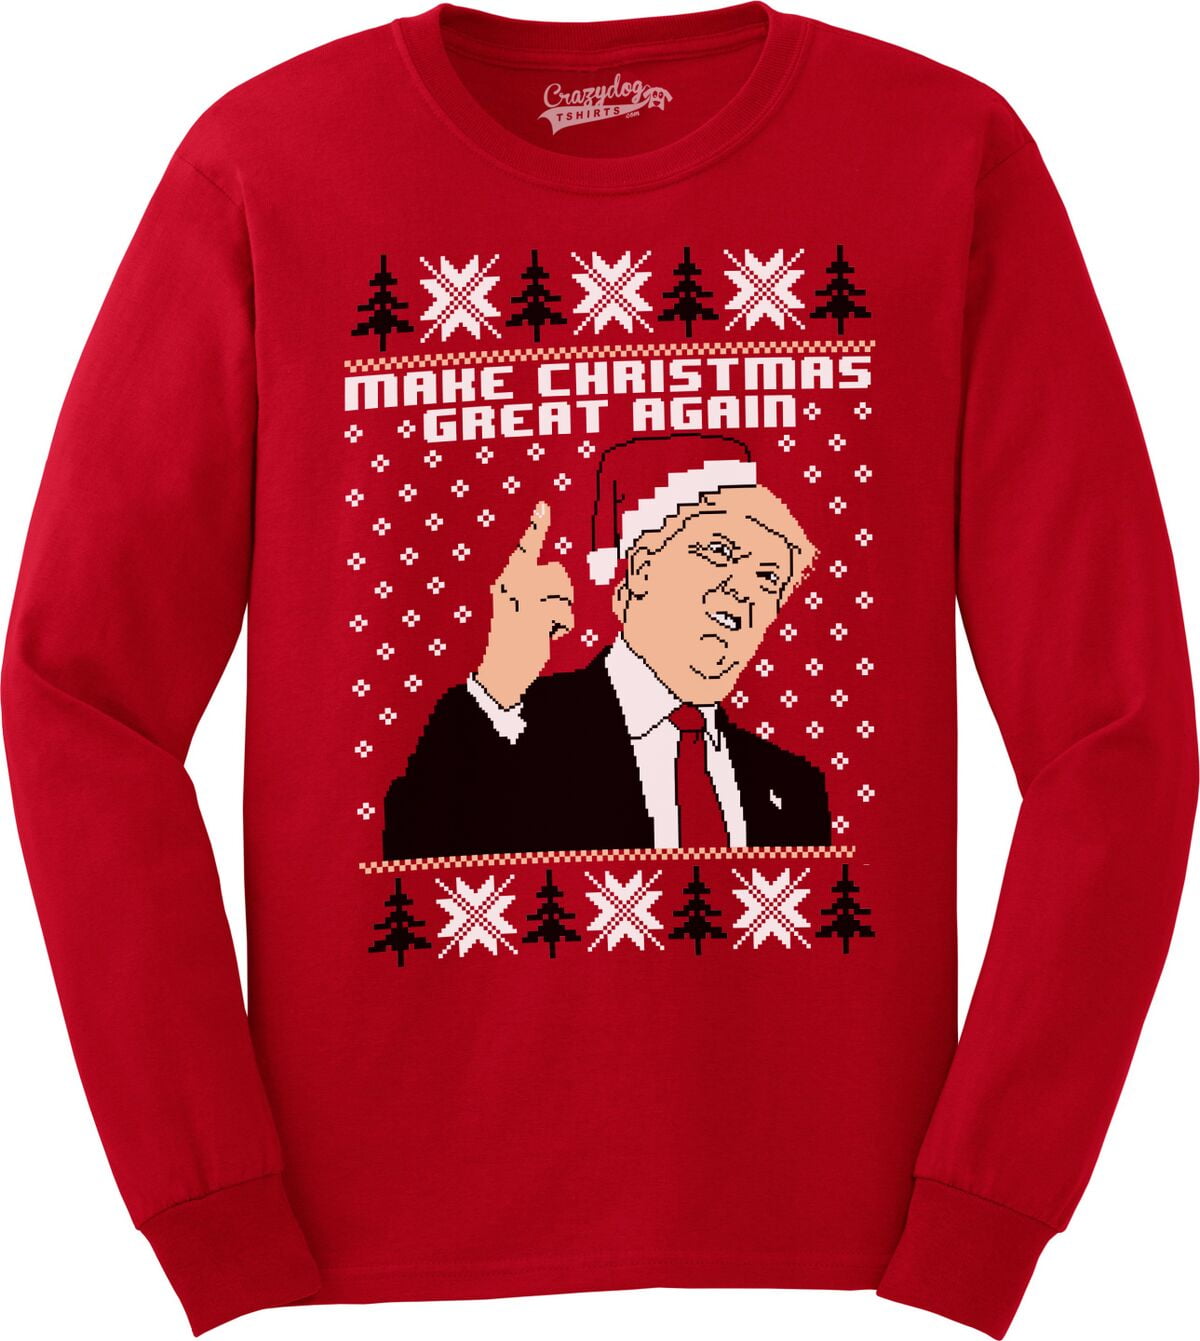 Ugly Christmas Sweater Party Joke Funny Festive Humor 2-tone Hoodie Pullover 